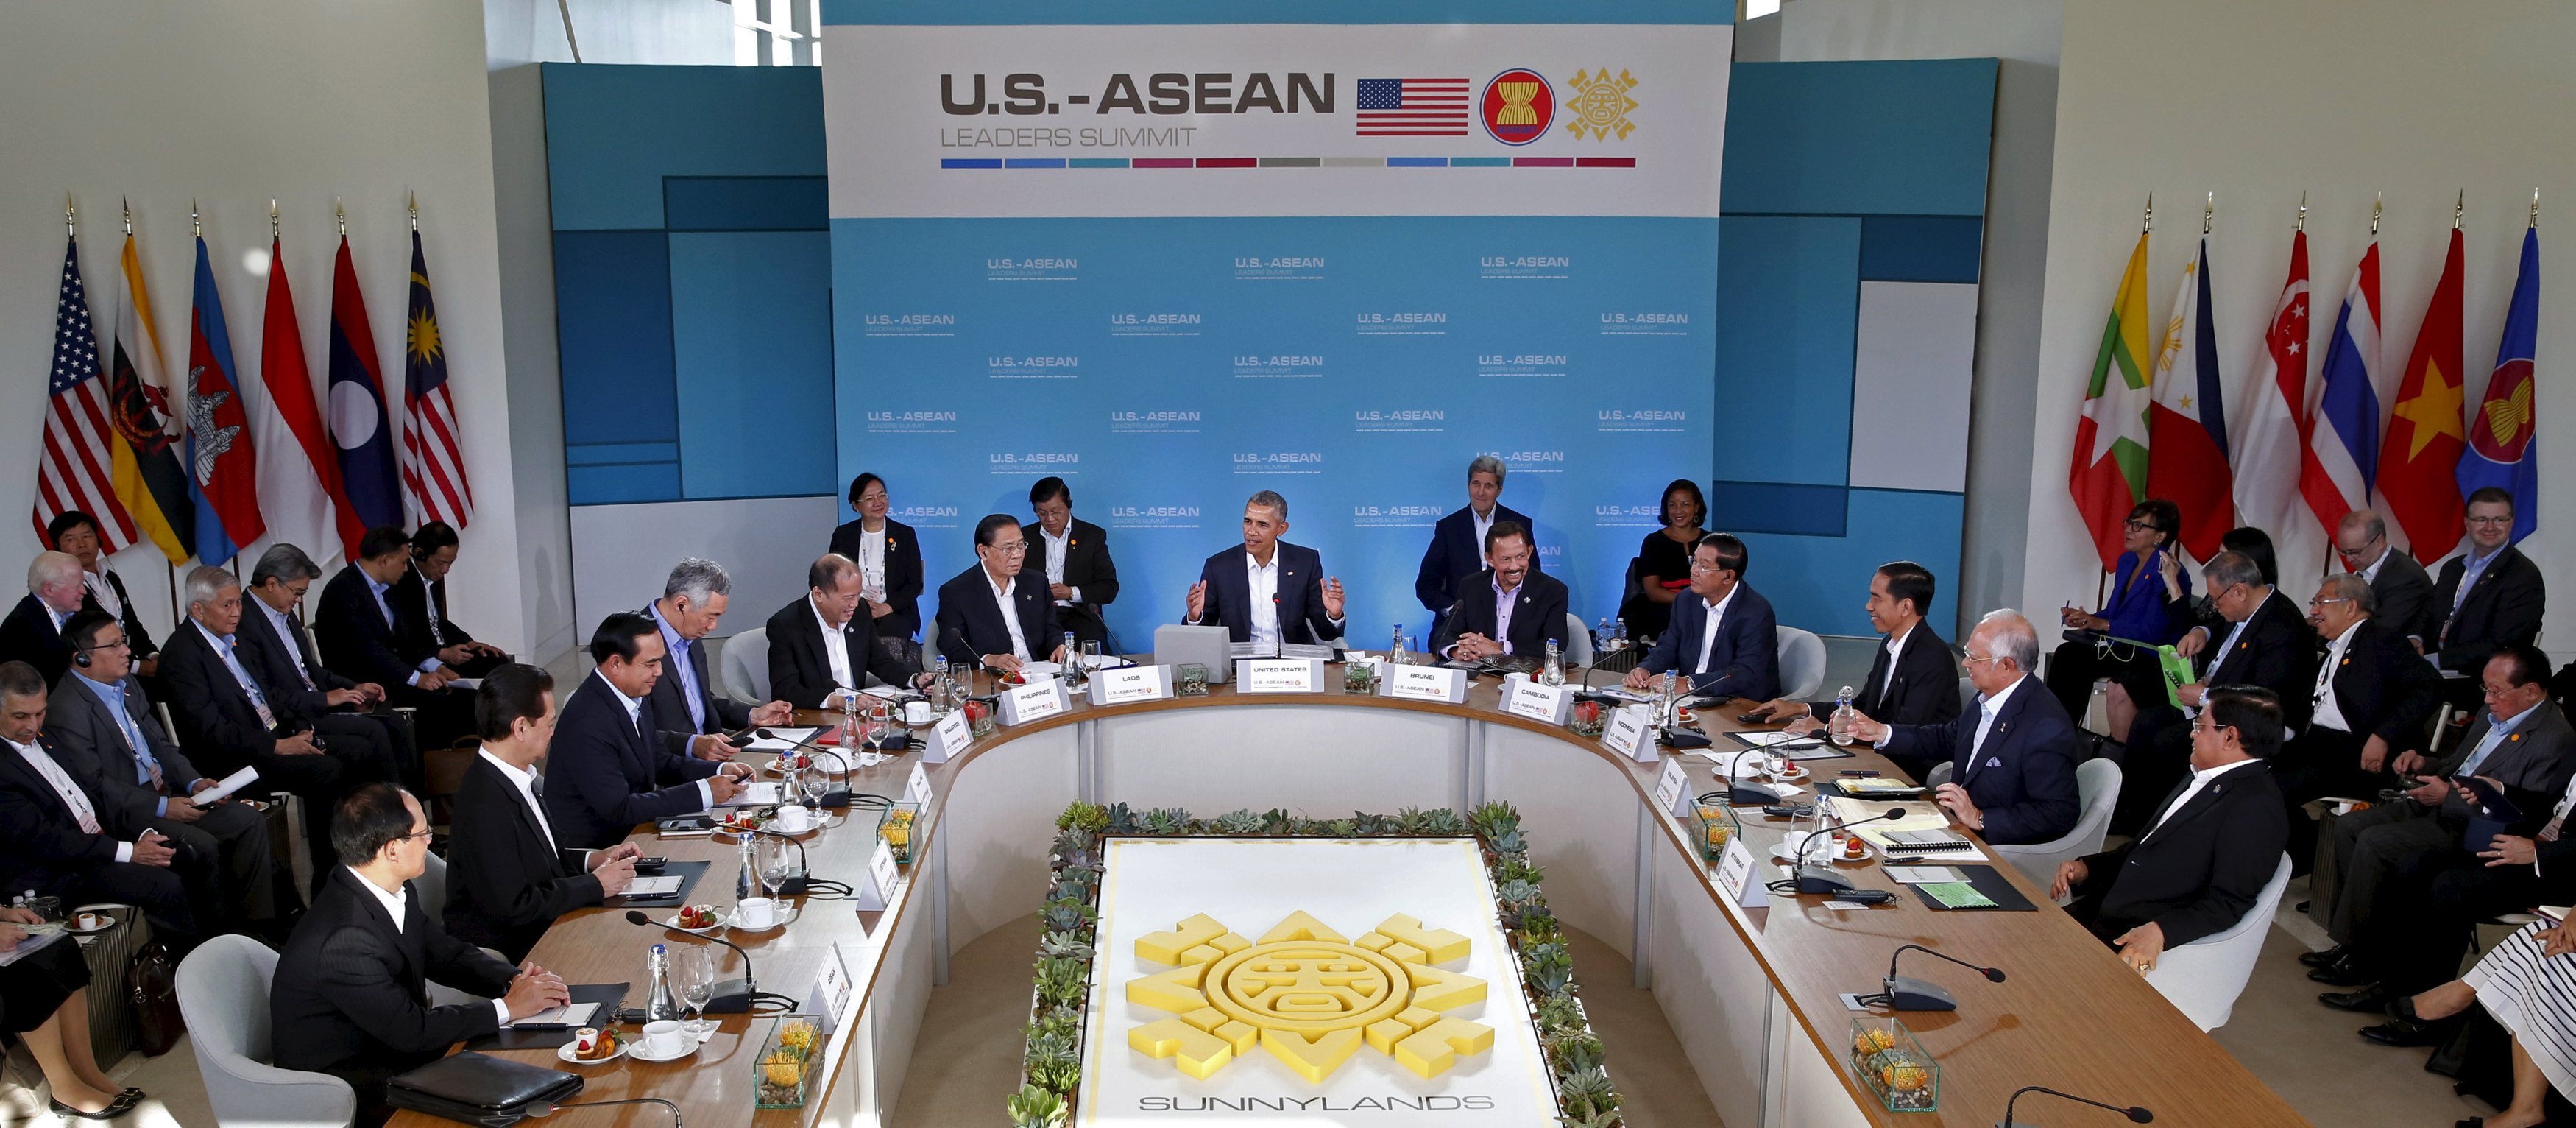 U.S. President Barack Obama makes opening remarks at the 10-nation Association of Southeast Asian Nations (ASEAN) summit at Sunnylands in Rancho Mirage, California February 15, 2016. Obama will press leaders from Southeast Asia to boost trade and back a common stance on the South China Sea this summit that the White House hopes will solidify U.S. influence in the region.REUTERS/Kevin Lamarque